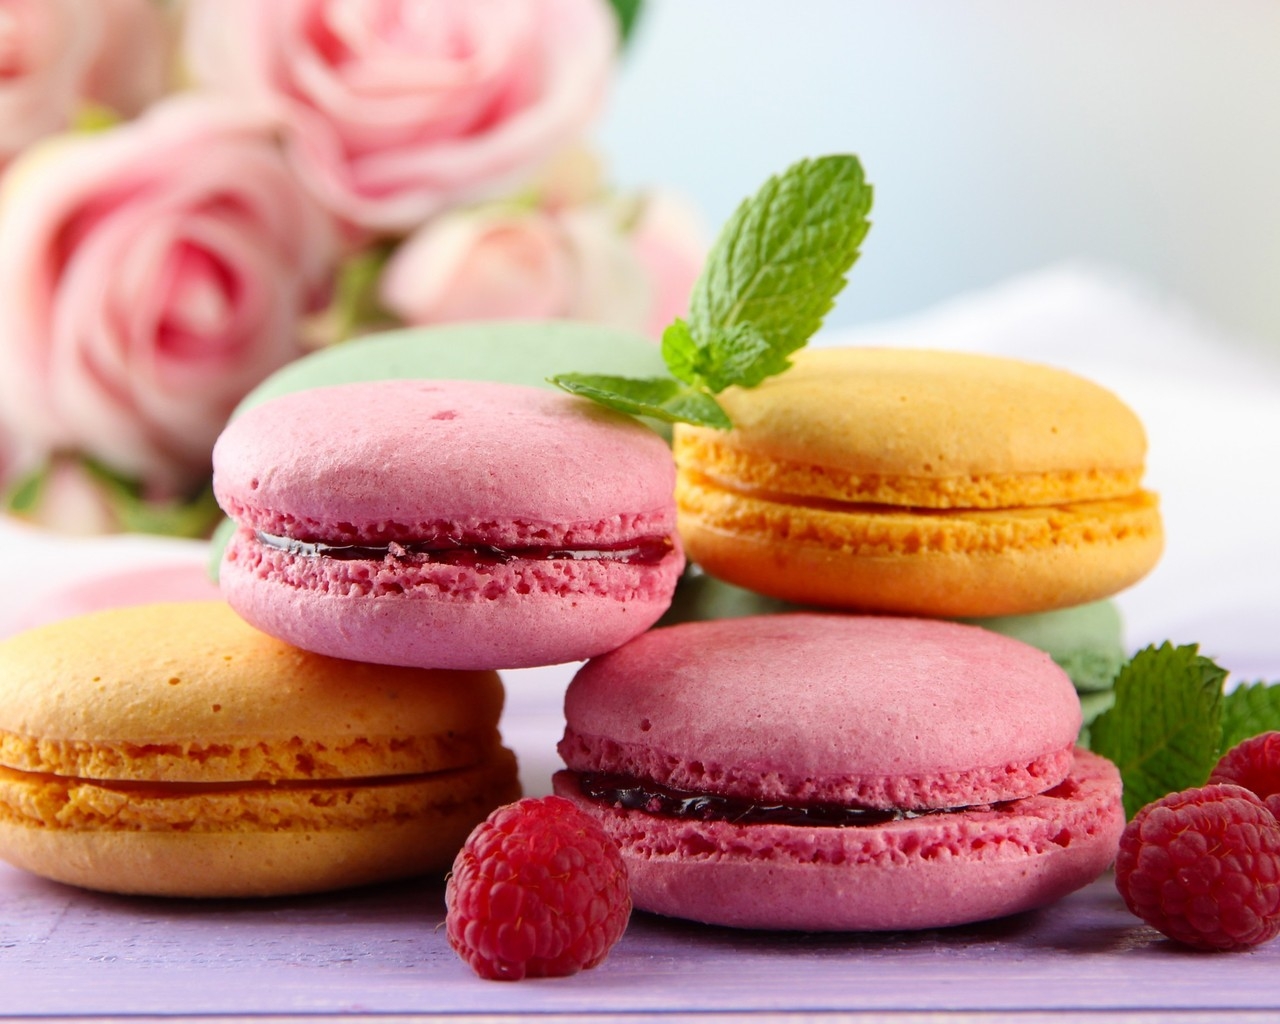 Tasty Macaroons for 1280 x 1024 resolution